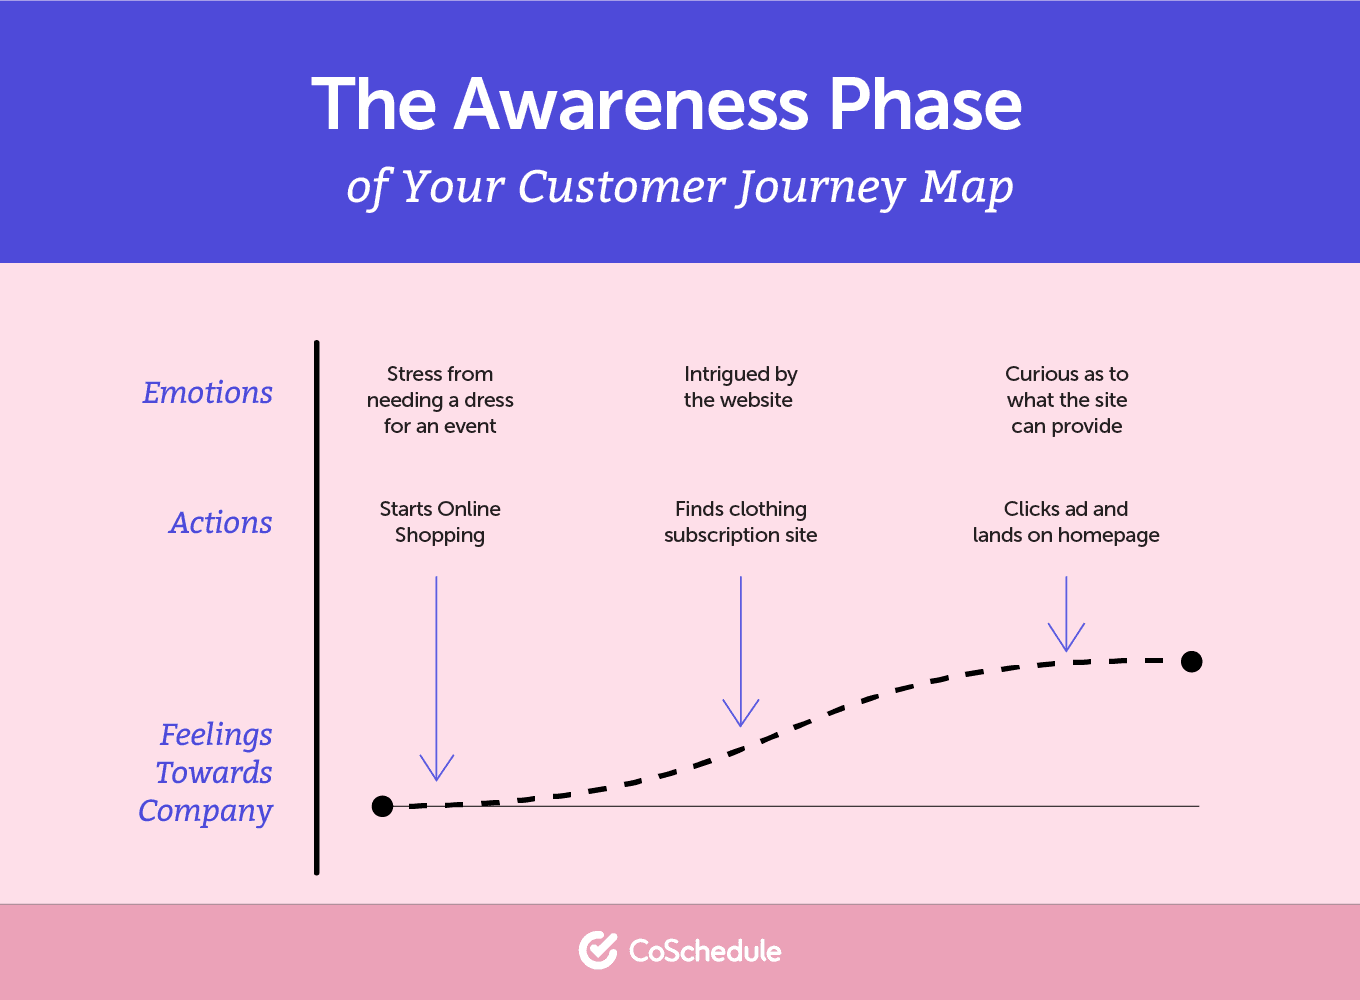 The awareness phase in a buyer's journey